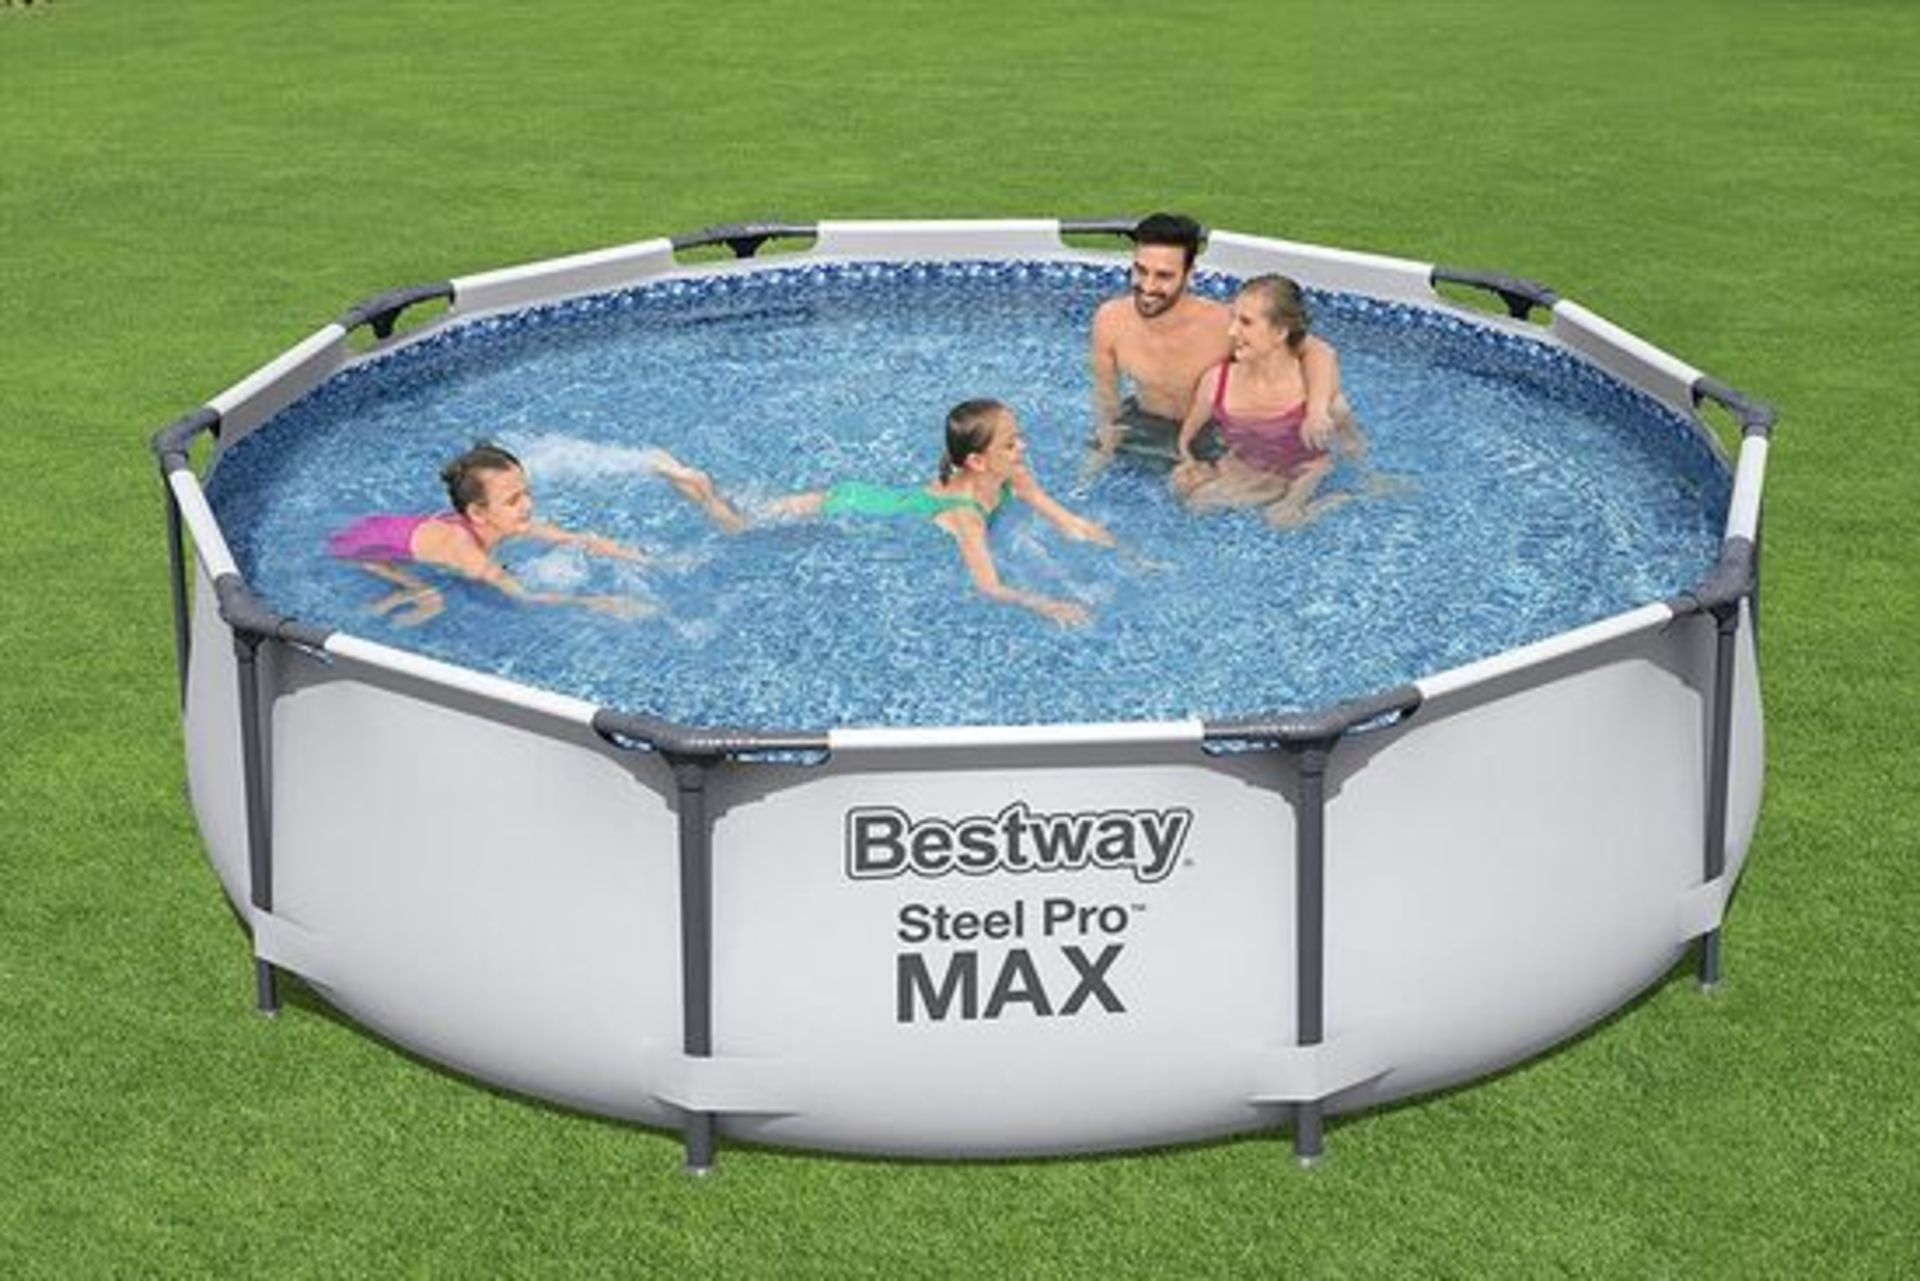 1 X BESTWAY STEEL PRO MAX ABOVE GROUND ROUND FRAME SWIMMING POOL - PRISMATIC STONE PRINTED INNER - Image 3 of 3